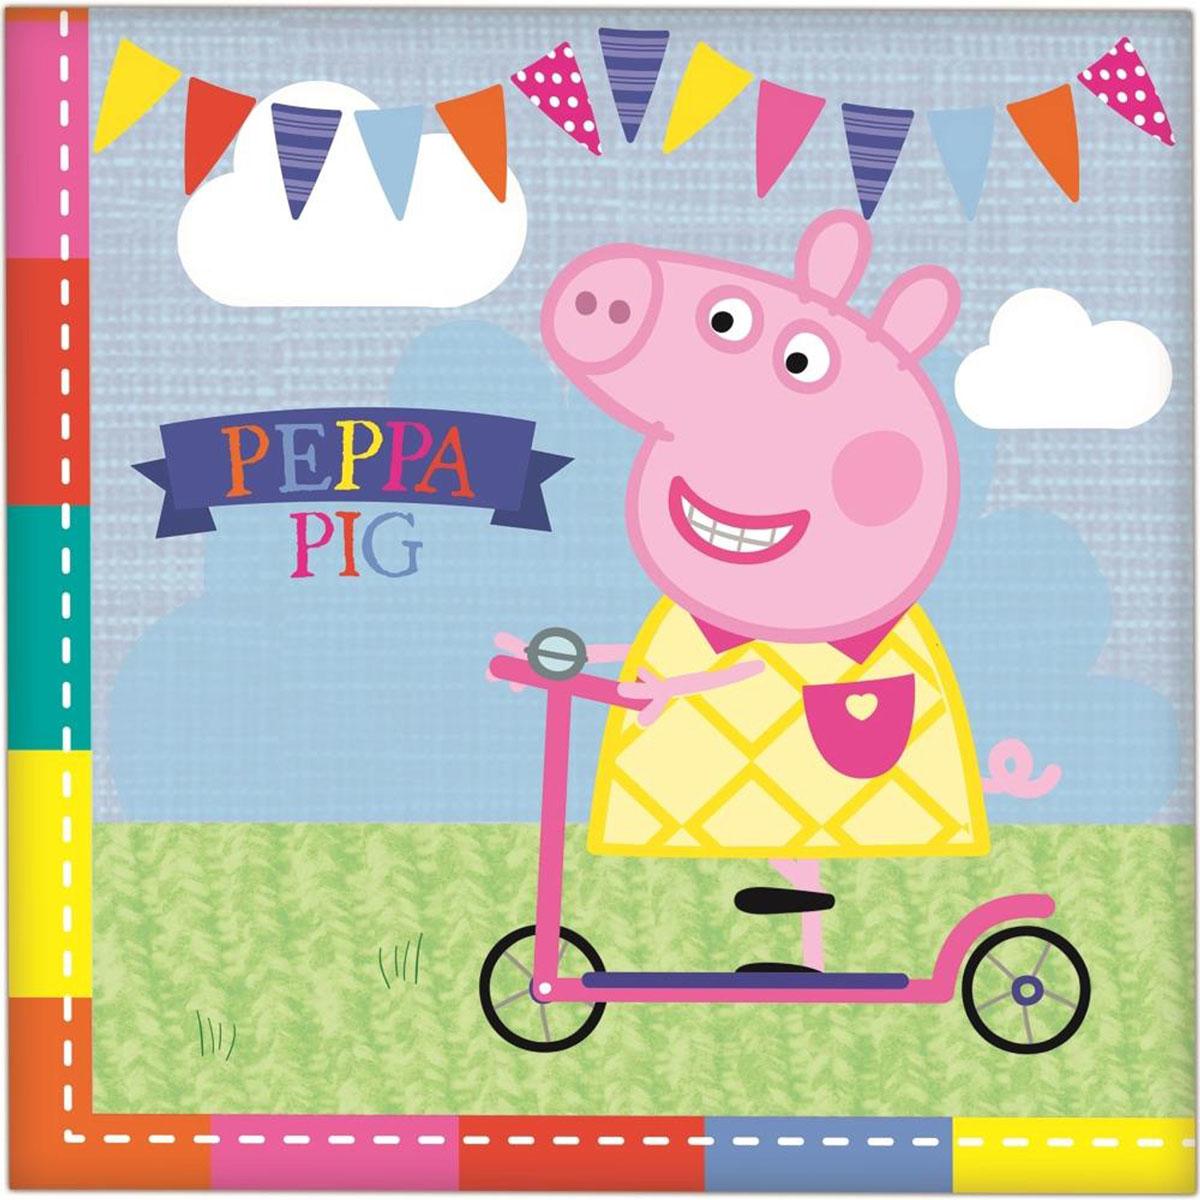 Peppa Pig Party Napkins 33cm - pk16 by Amscan 236101 available here at Karnival Costumes online party shop